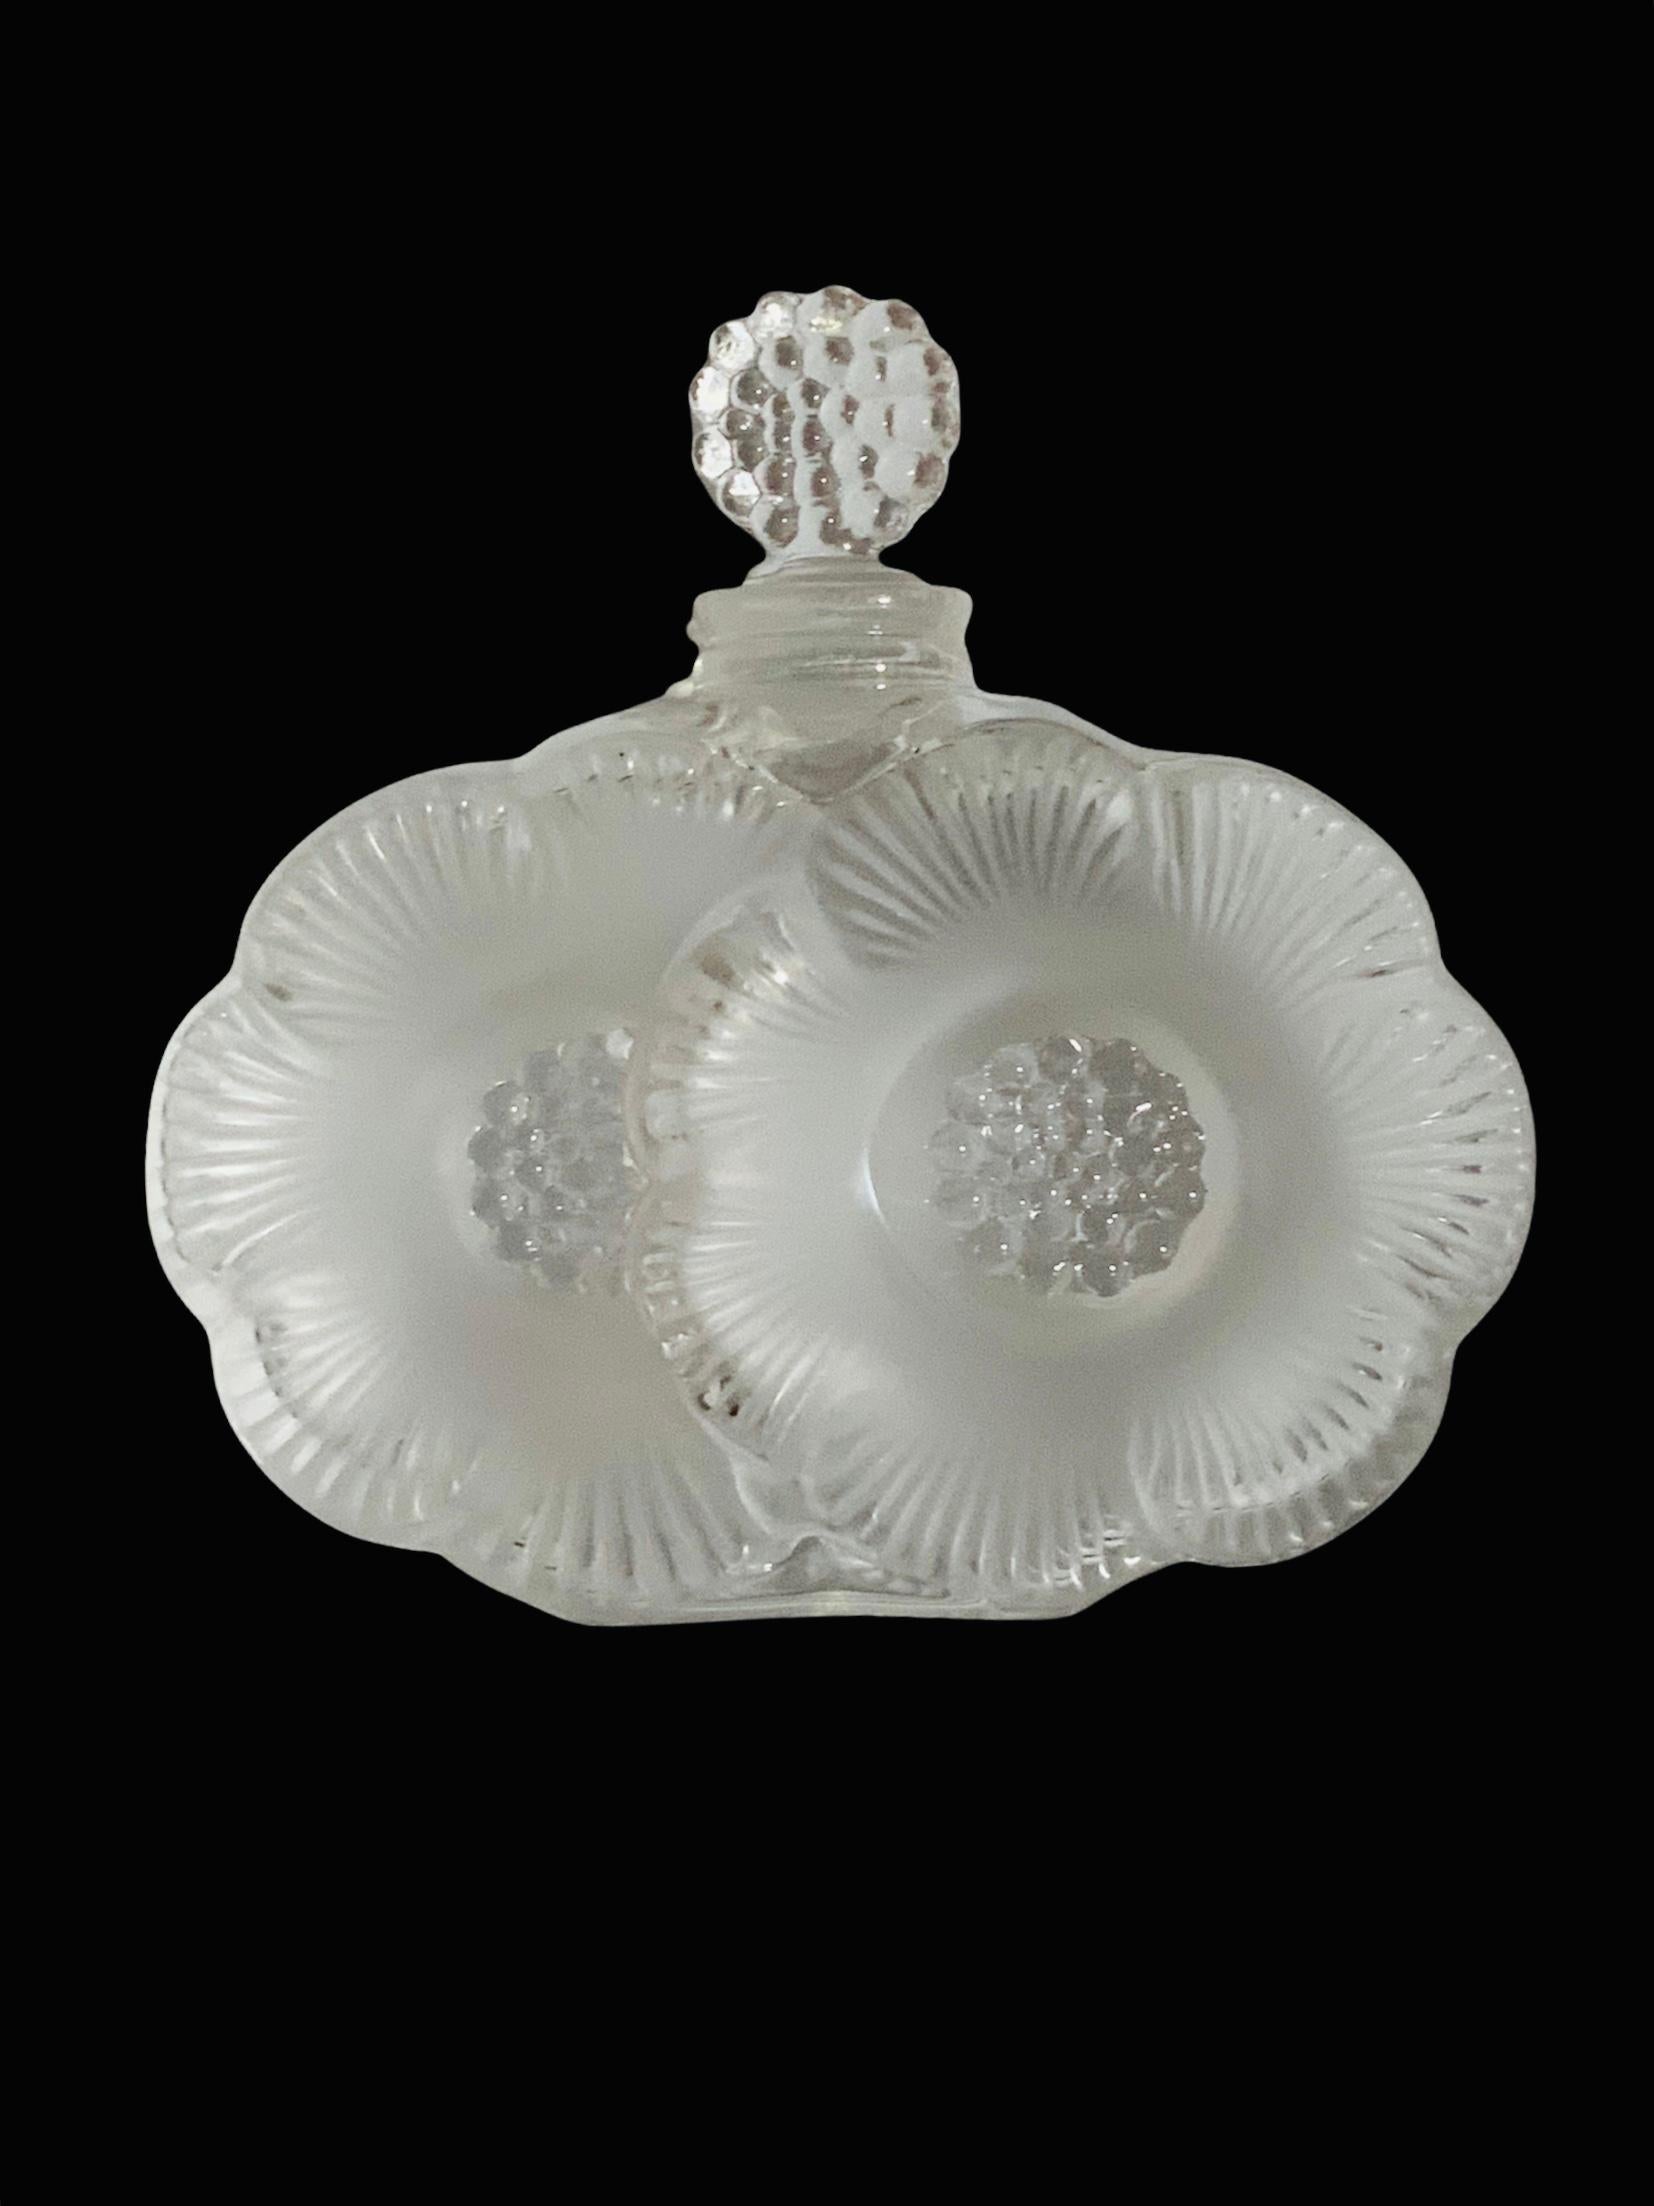 This a Lalique Crystal Deux Fleurs Anemone “petite” perfume bottle. It depicts two frosted/clear Anemone flowers. The Anemone flower symbolizes anticipation, fragility or forsaken love. Below the bottle, it is the acid etched signature of Lalique,